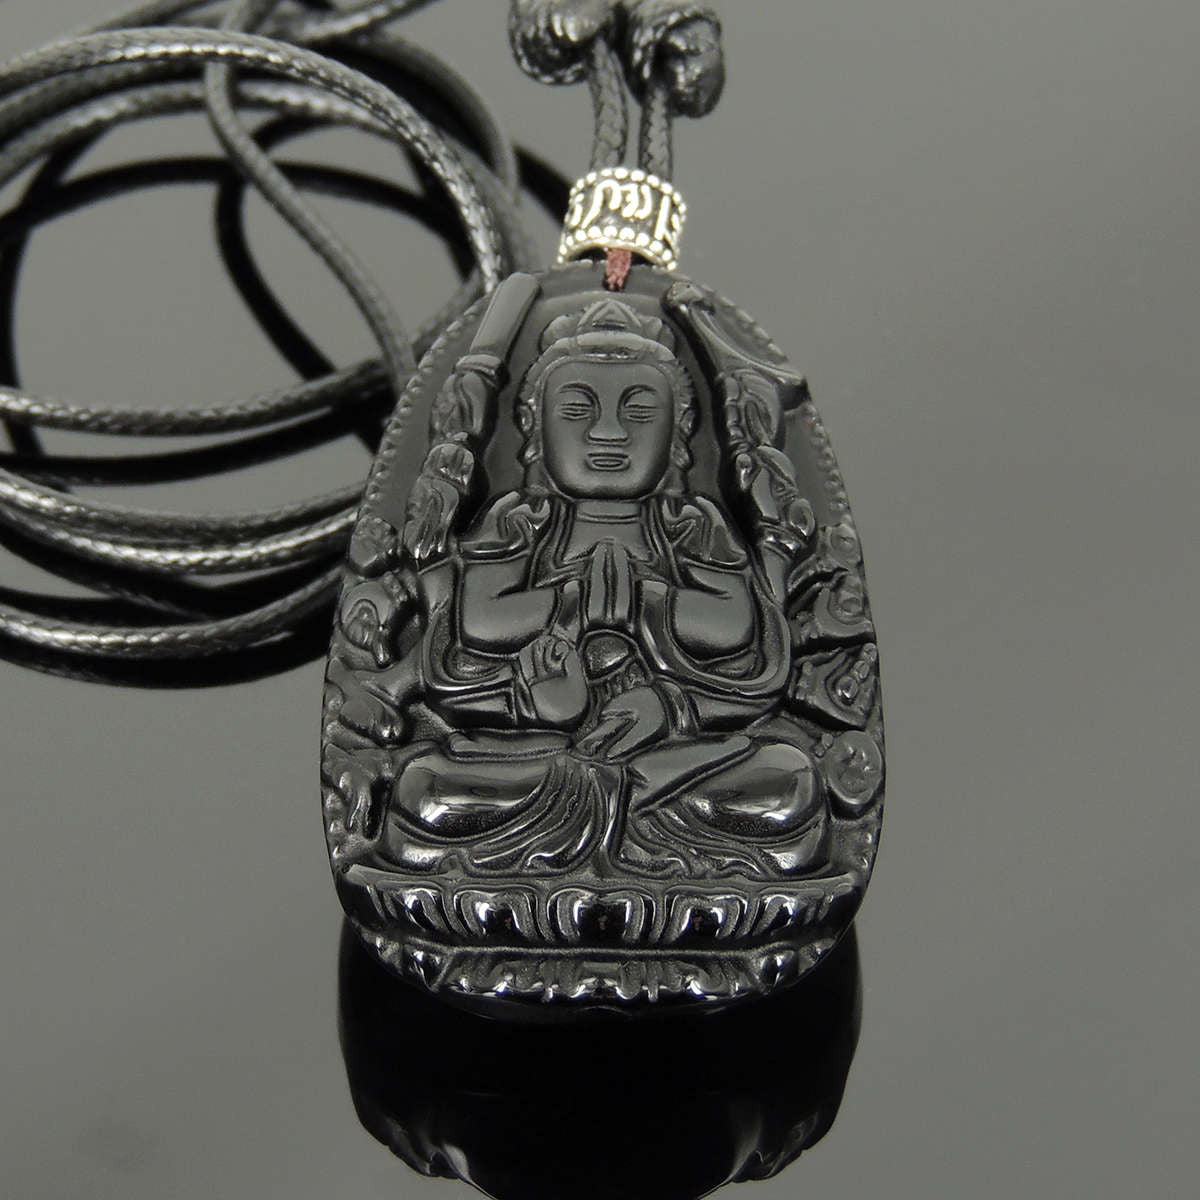 Adjustable Wax Rope Necklace with Black Obsidian Guanyin Buddha Pendant & S925 Sterling Silver OM Meditation Barrel Bead - Handmade by Gem & Silver NK186